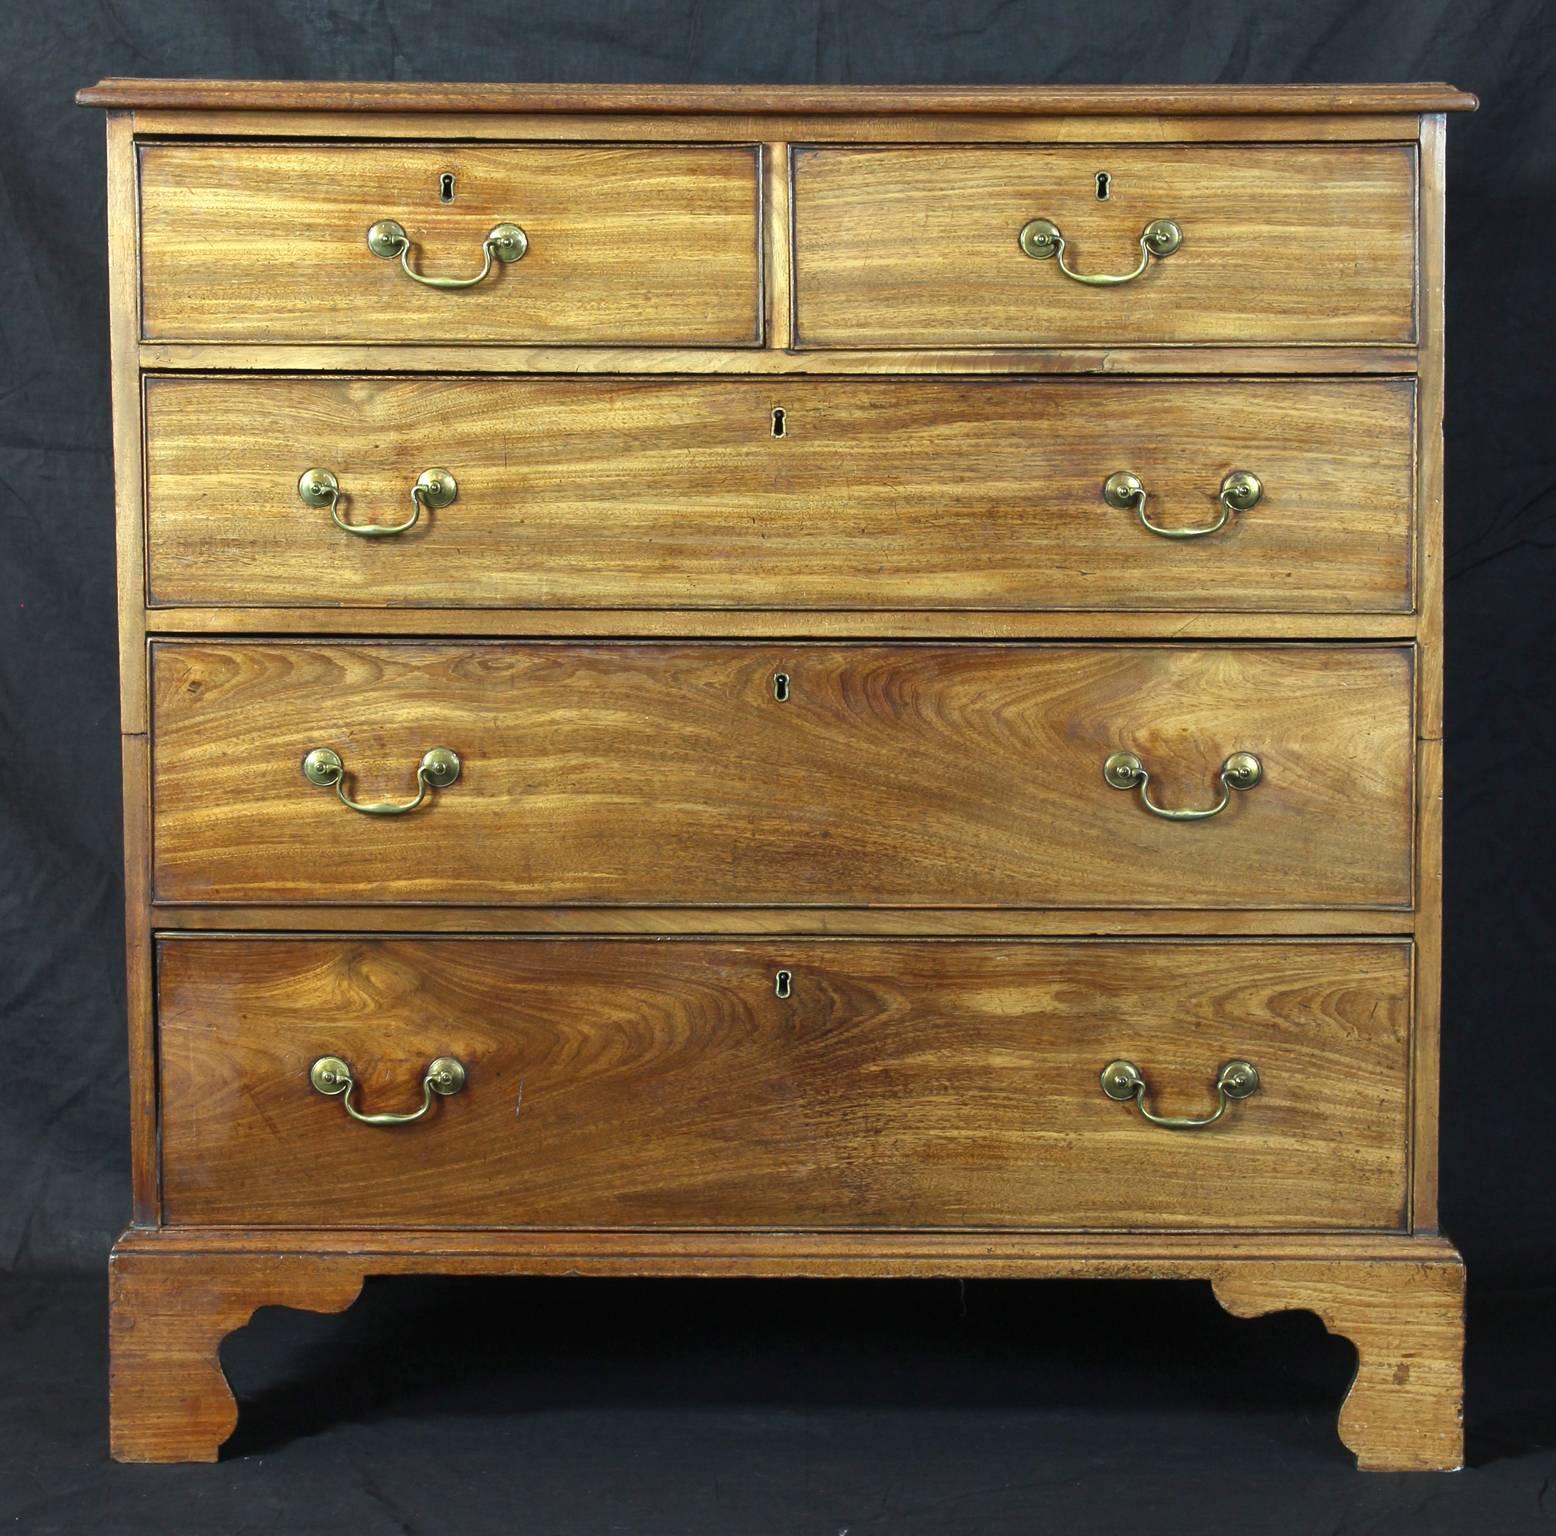 An elegant late 18th century sun faded mahogany chest of drawers with two short and three graduated long drawers with original brass handles and bracket feet.